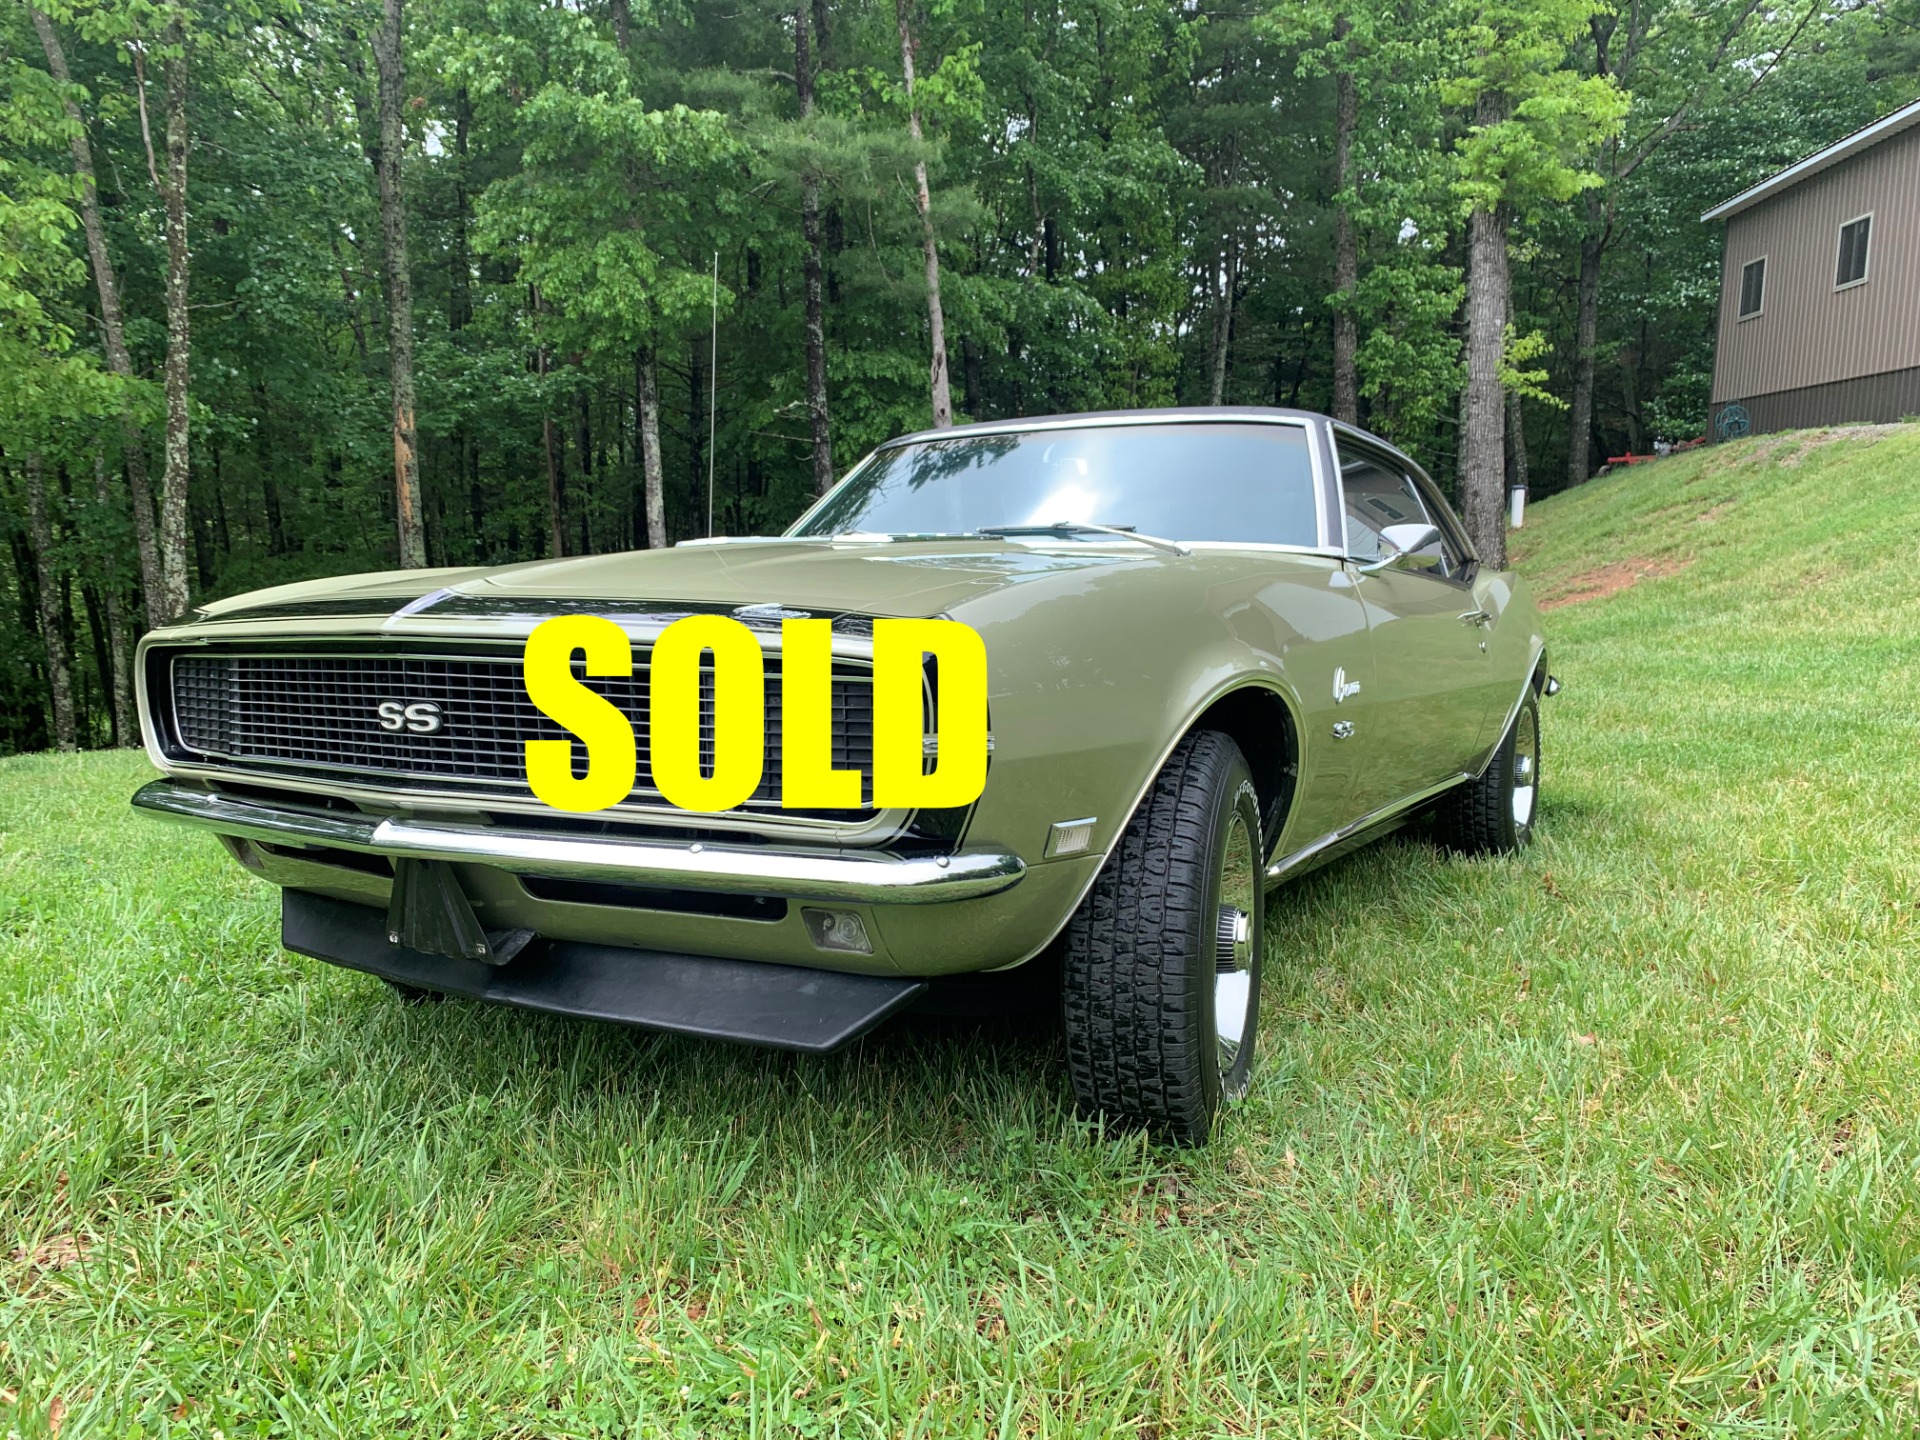 Used 1968 Chevrolet Camaro RS/SS 396  210 , For Sale $69500, Call Us: (704) 996-3735